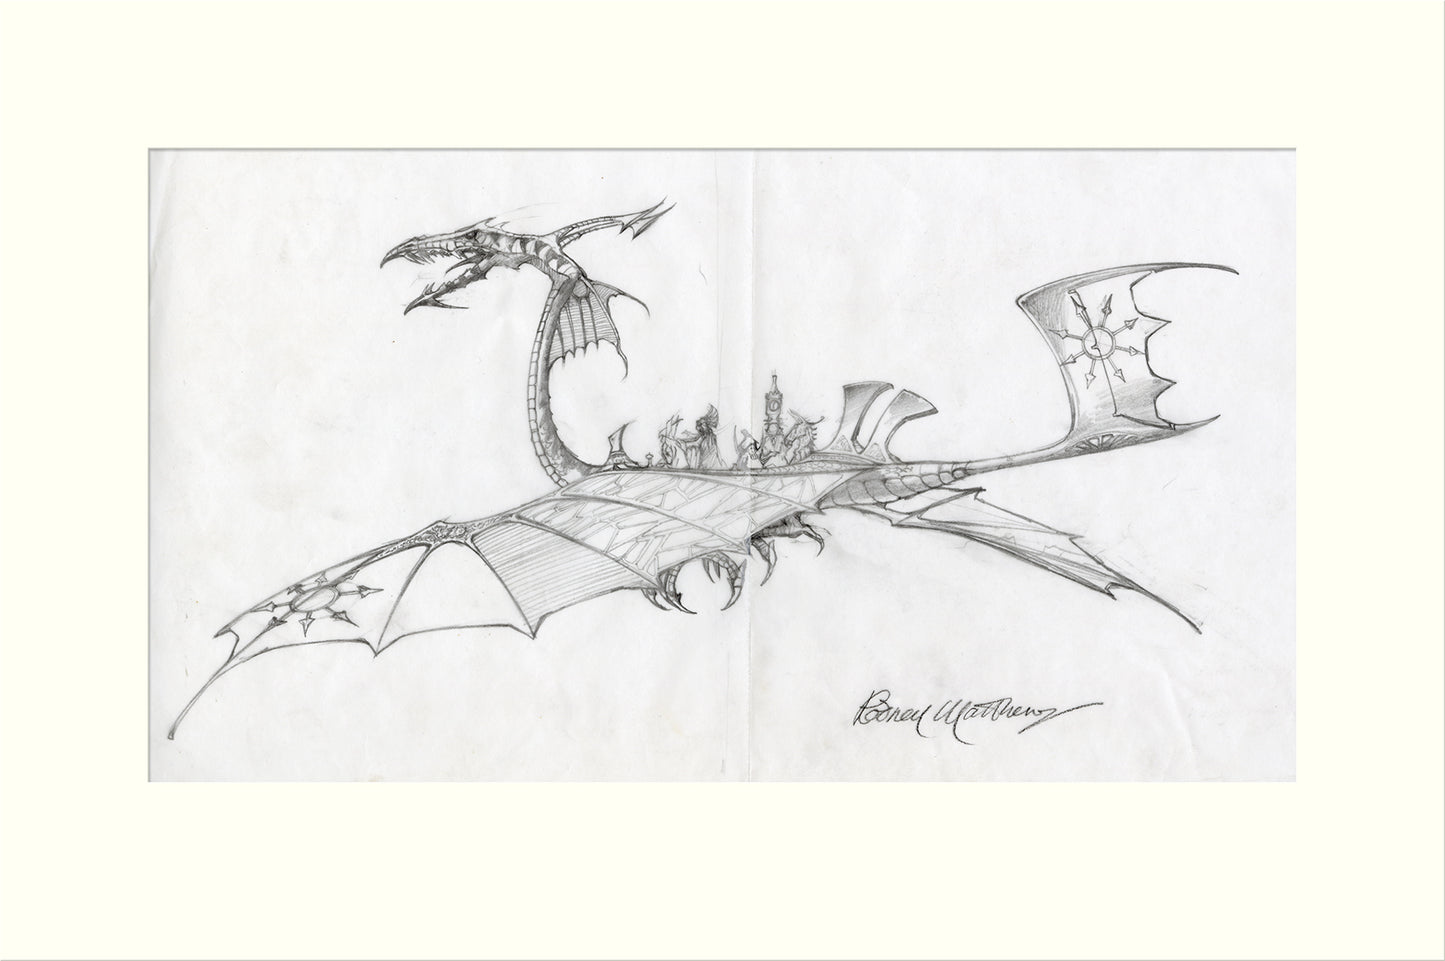 The Air Car pencil drawing by Rodney Matthews